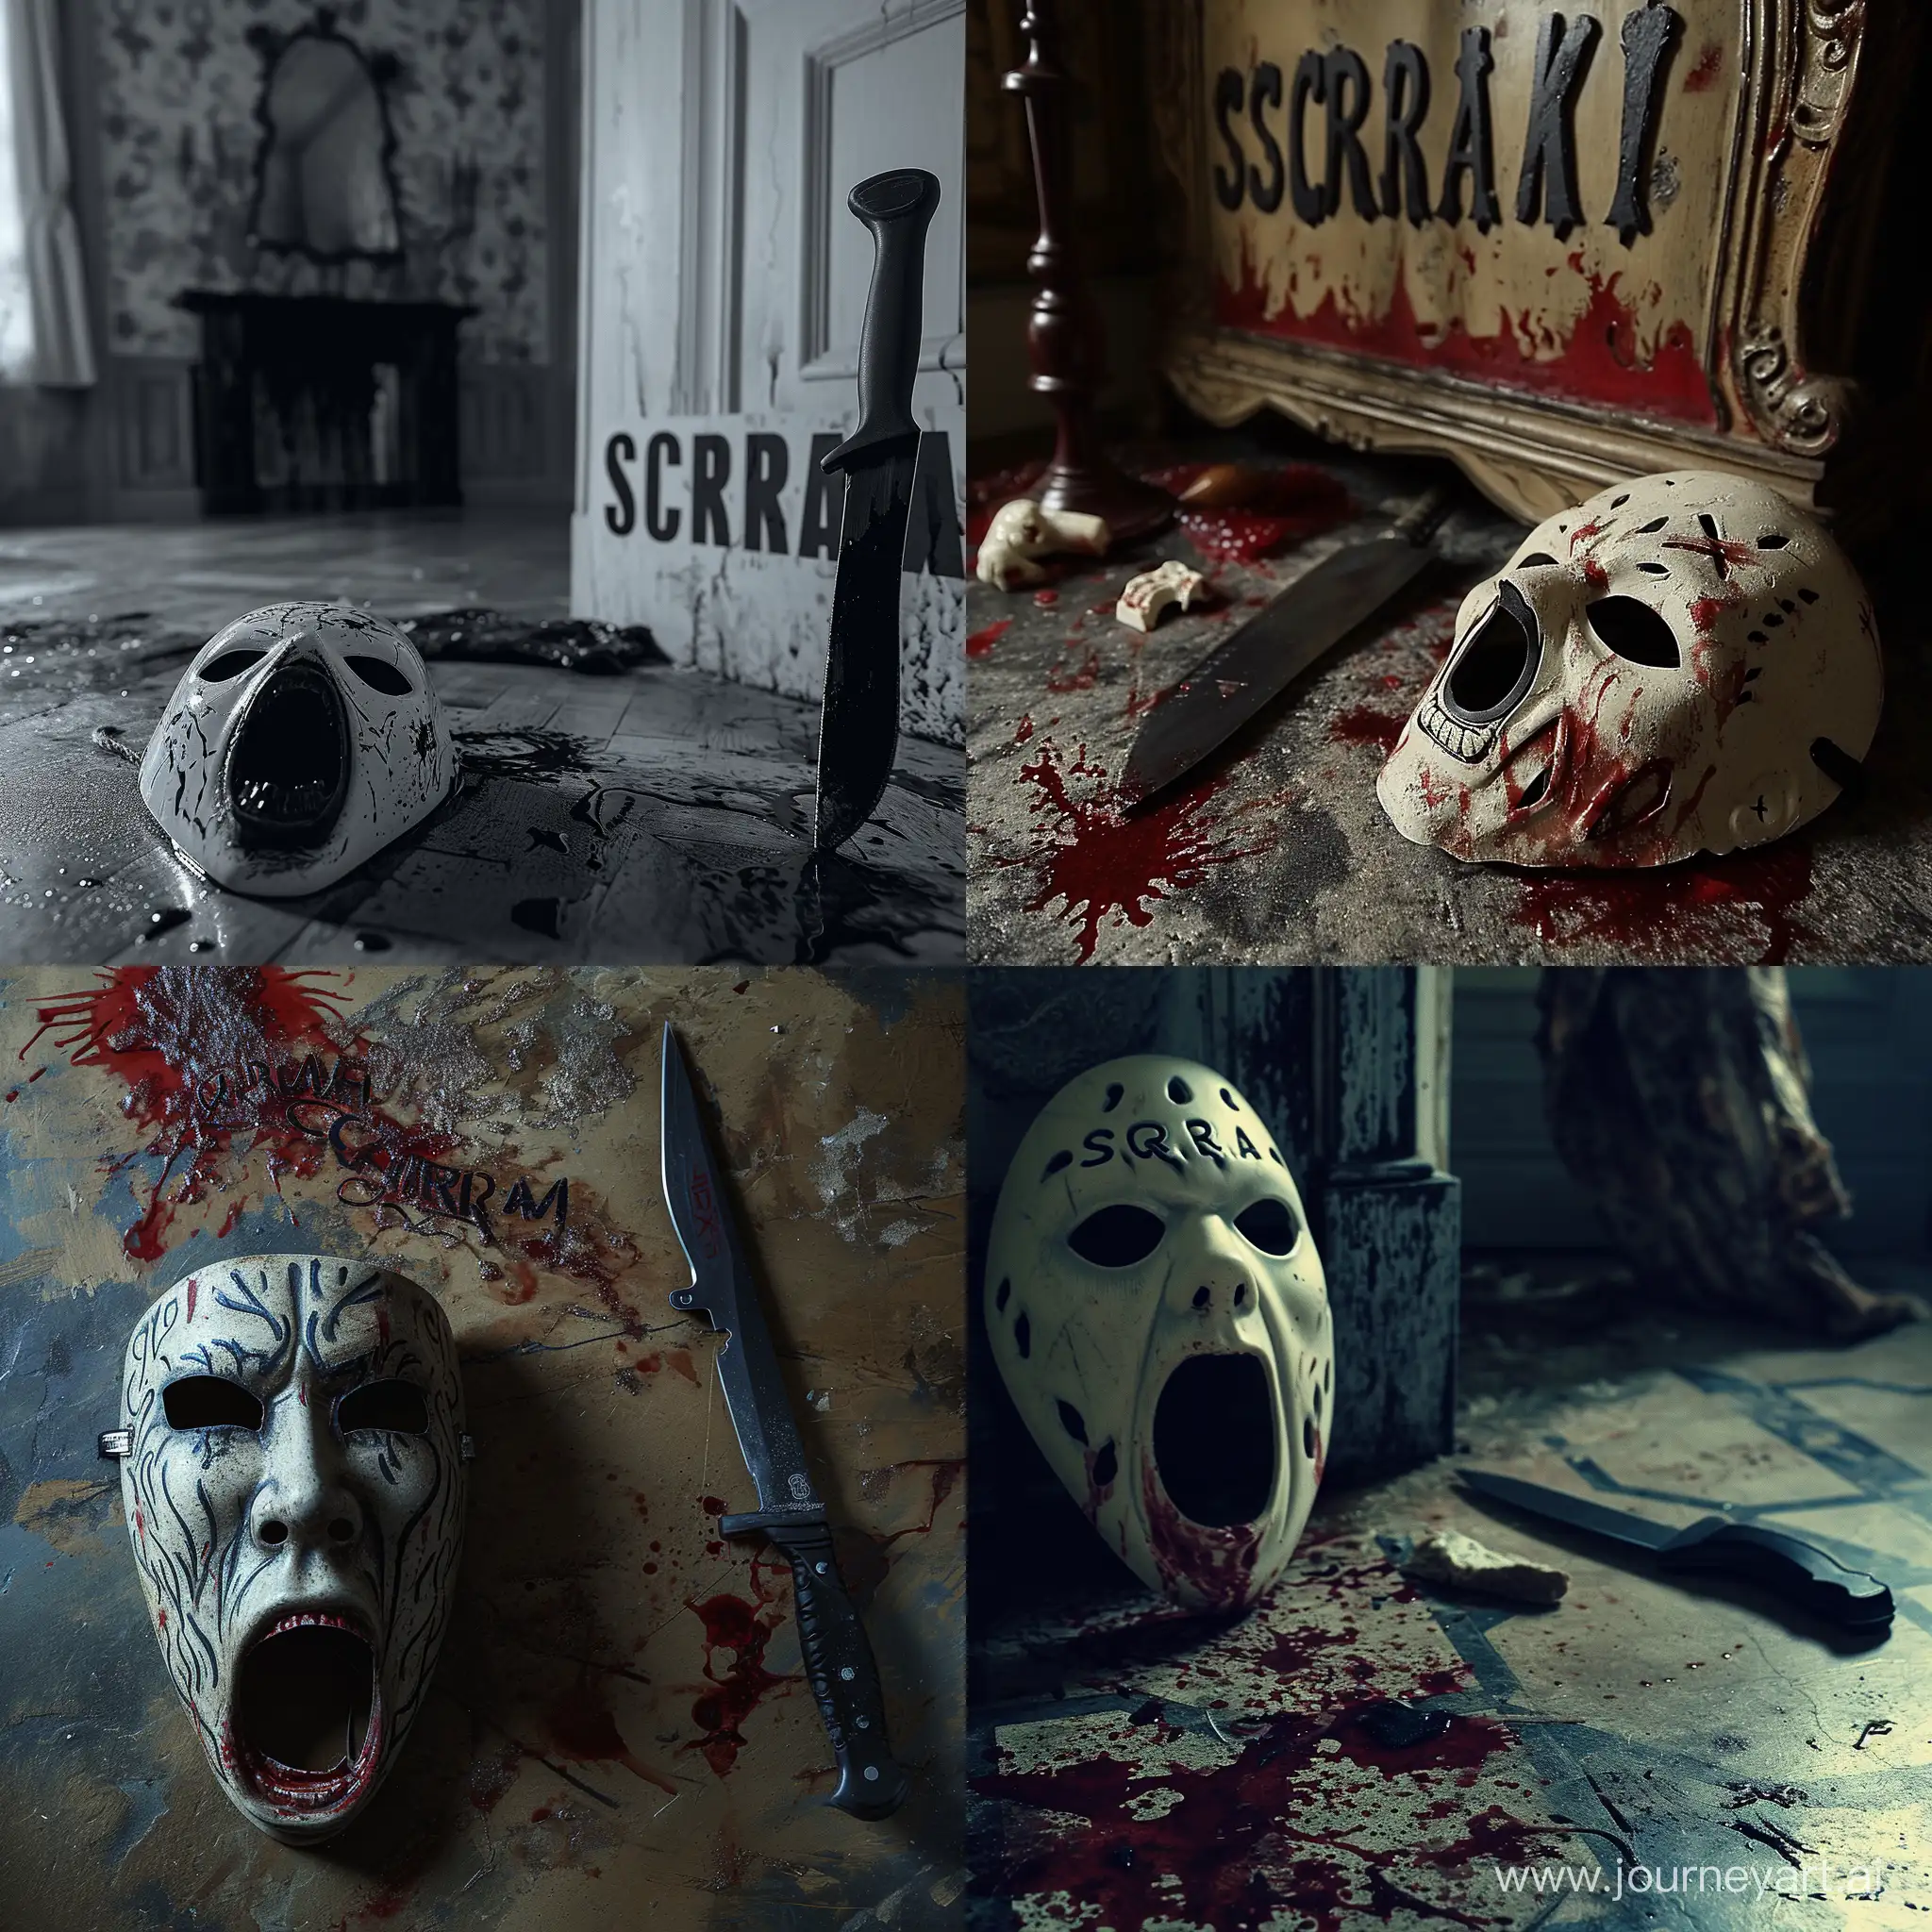 Scream-Mask-and-Bloodied-Knife-Composition